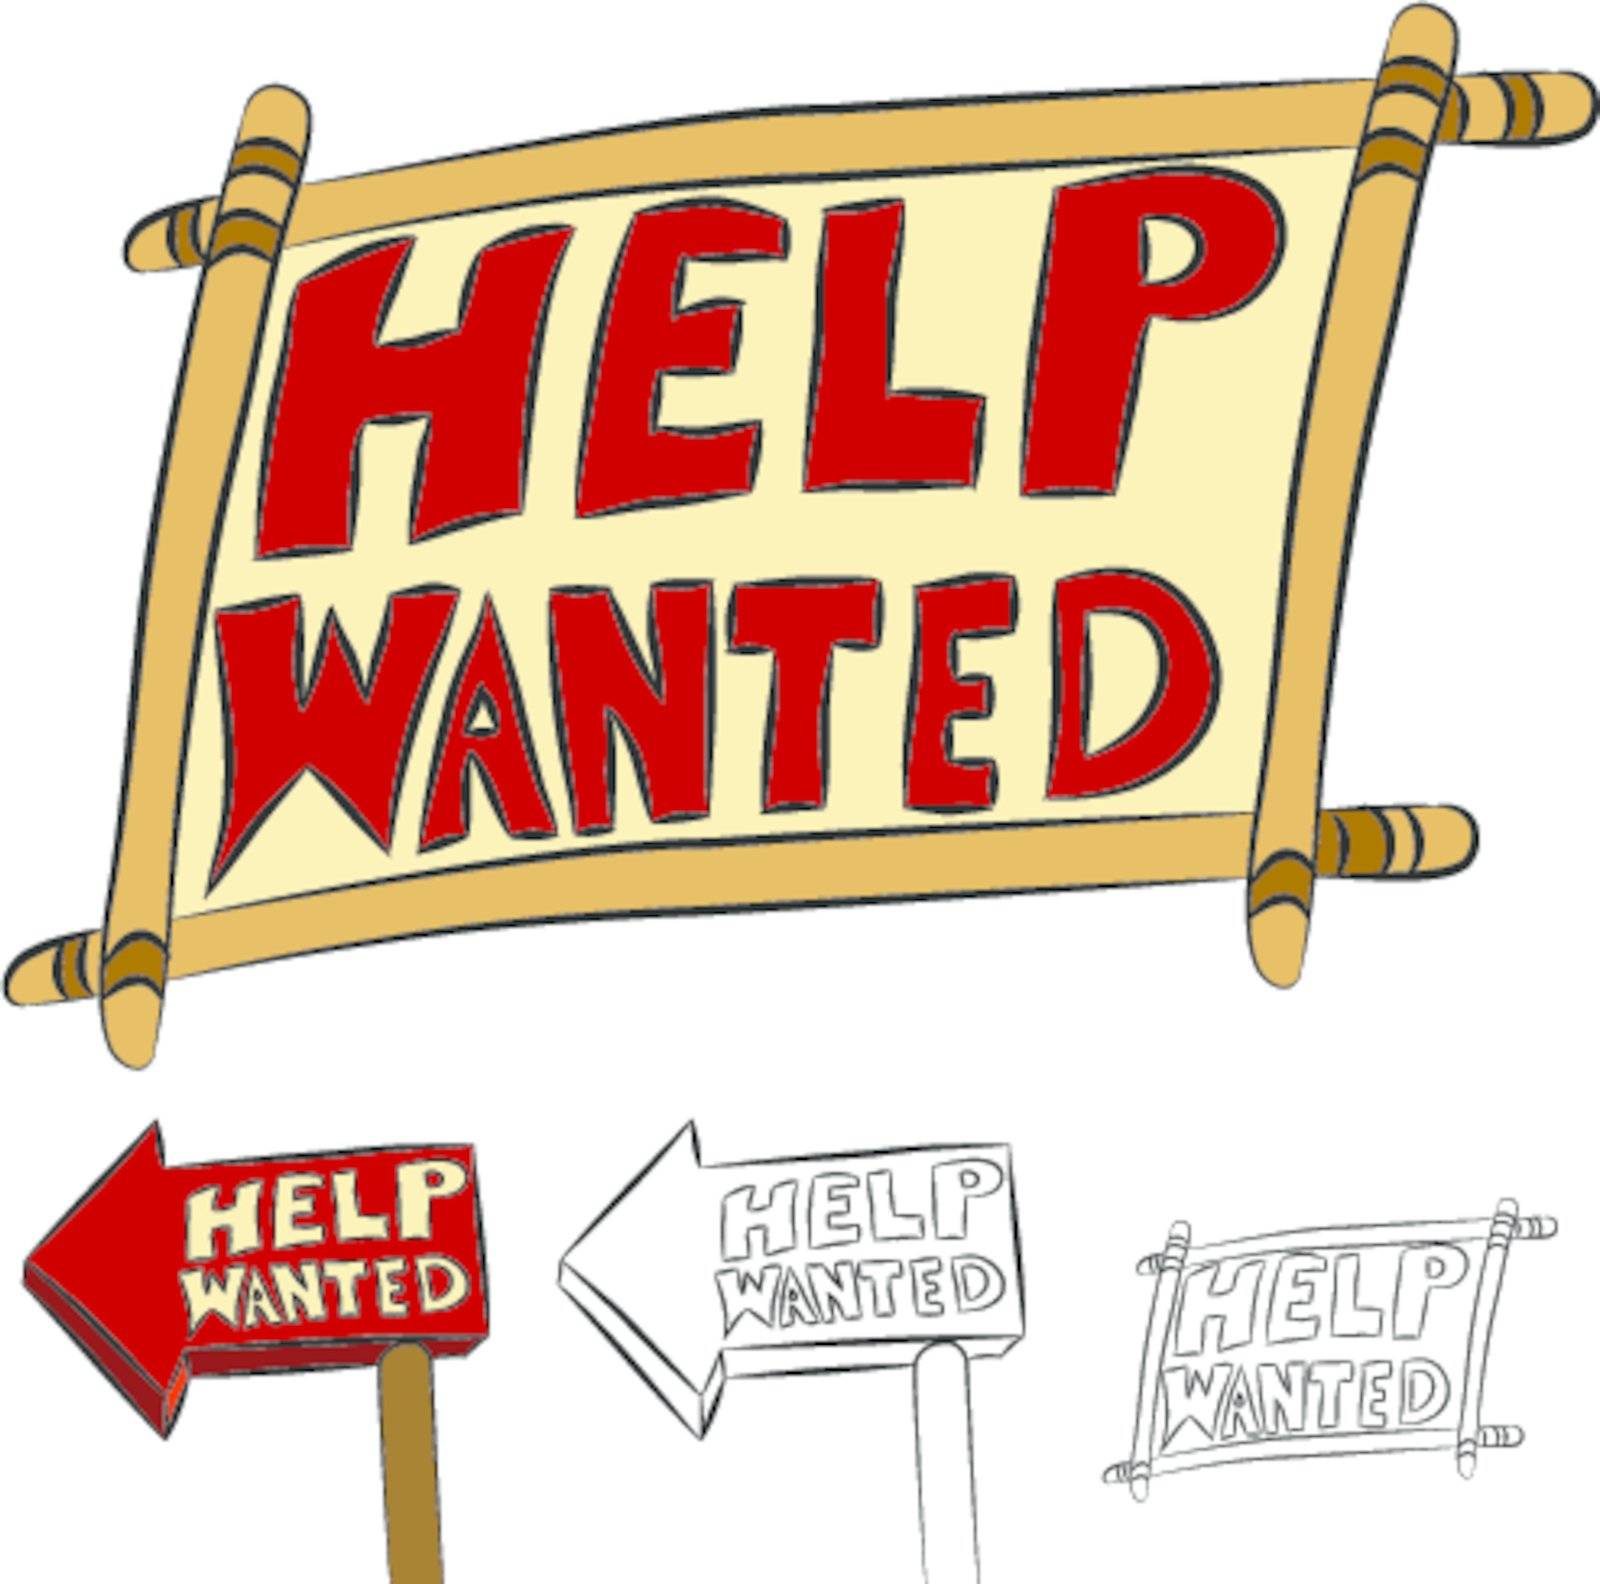 An image of a set of help wanted signs.